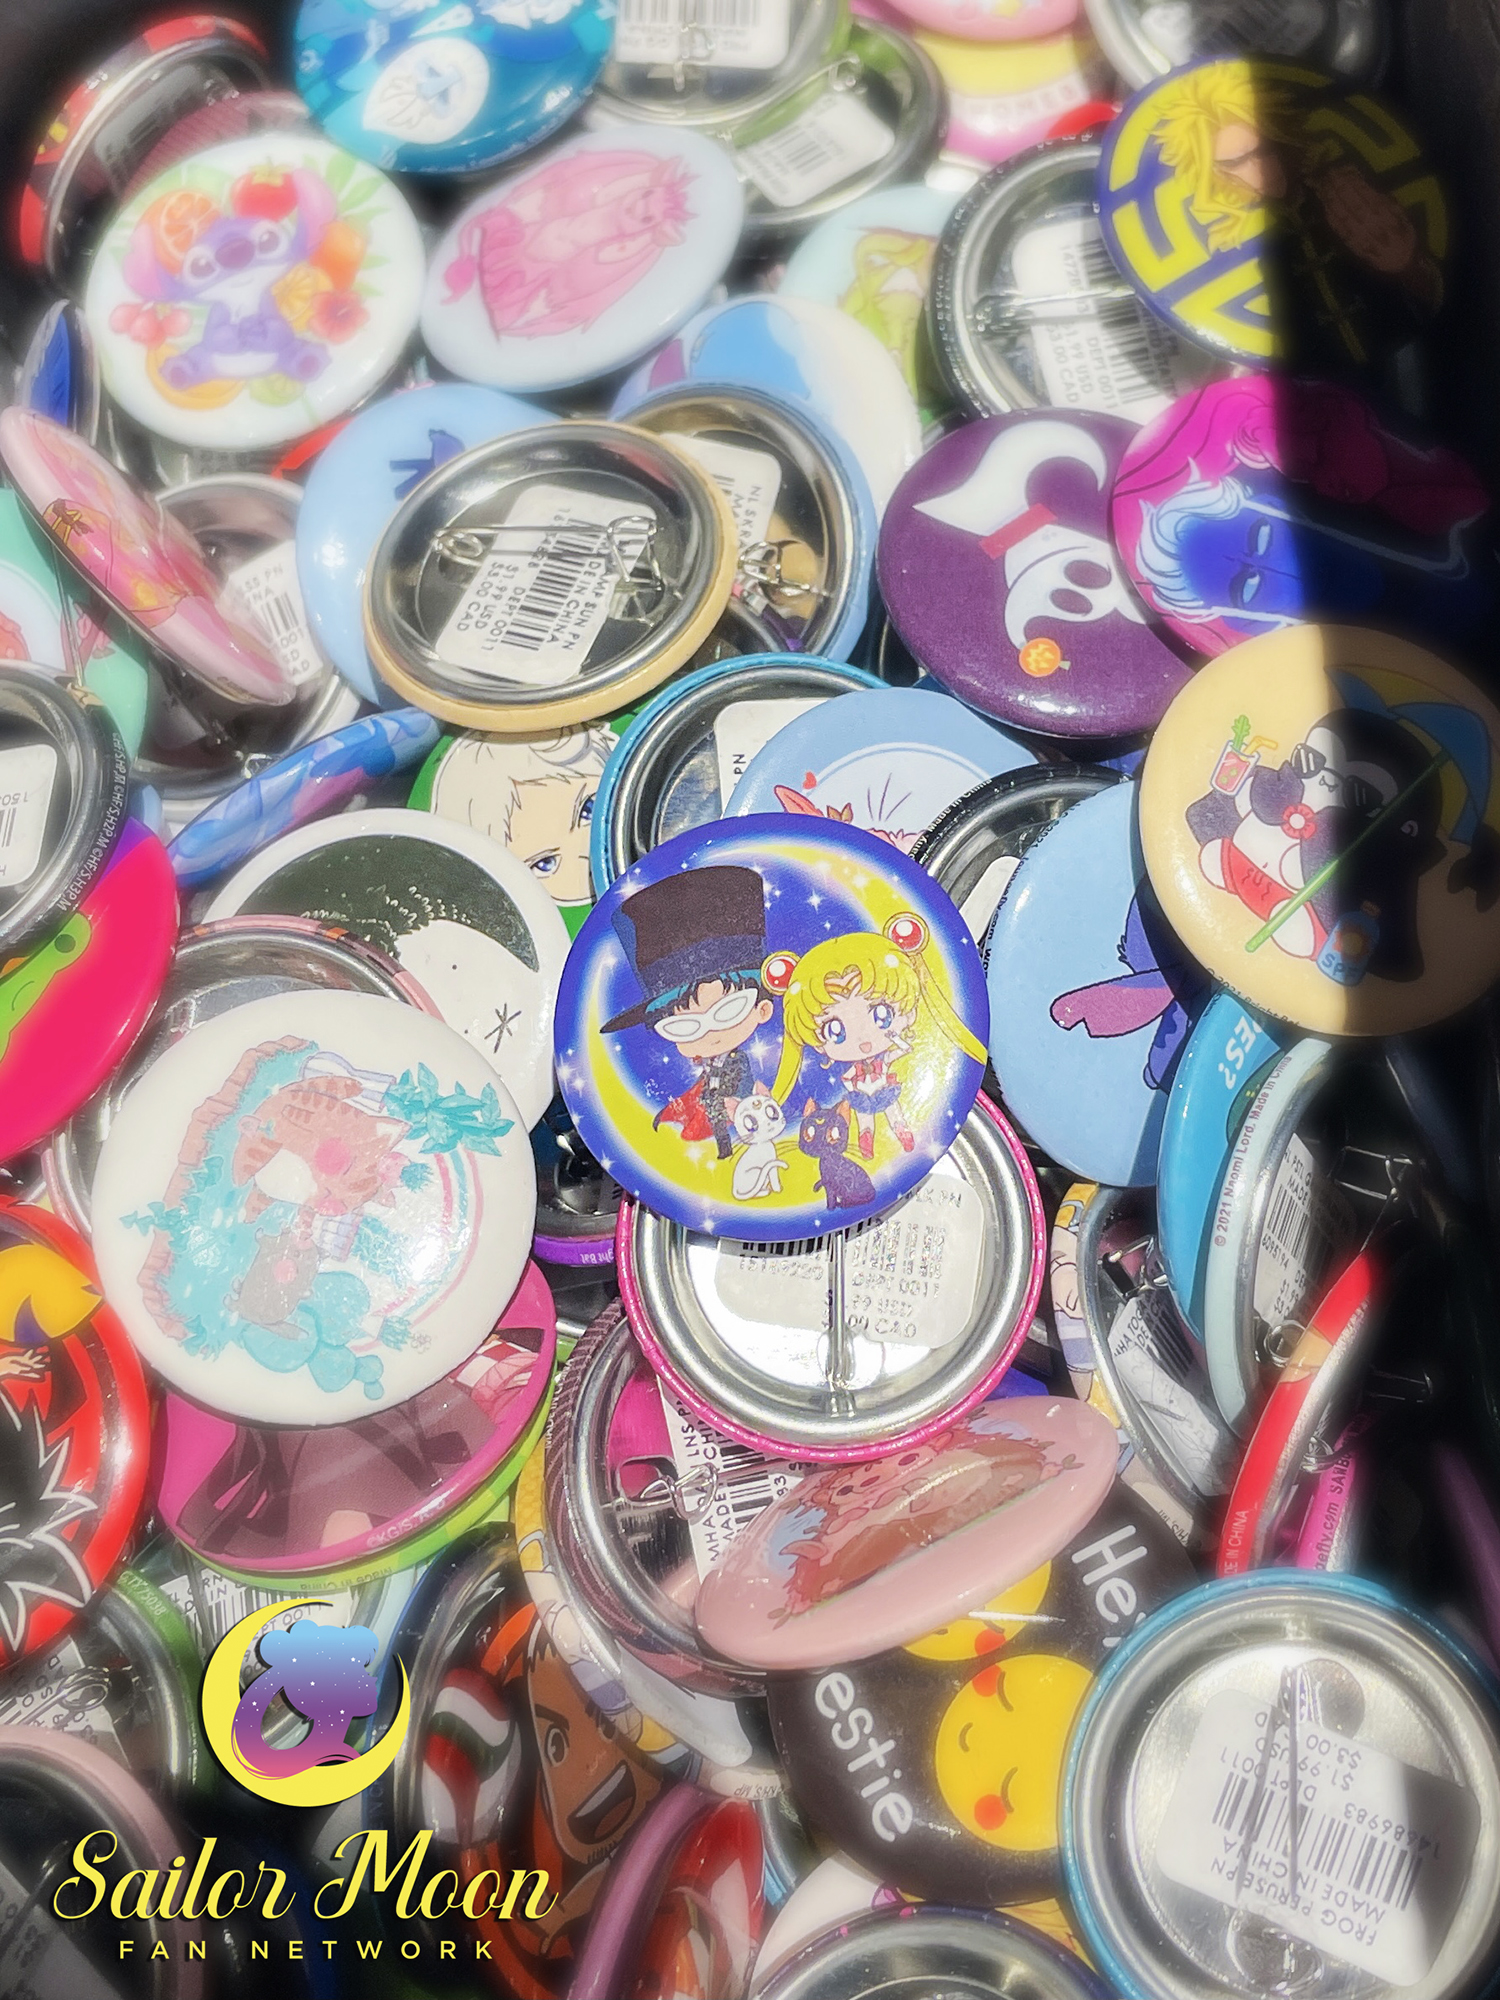 Loid Yor Forger SPY FAMILY Anya Forger Metal Enamel Badge Button Brooches  Anime Lapel Pins Backpacks Accessories Gift For Friend From  Baby_topwholesaler1, $2.09 | DHgate.Com